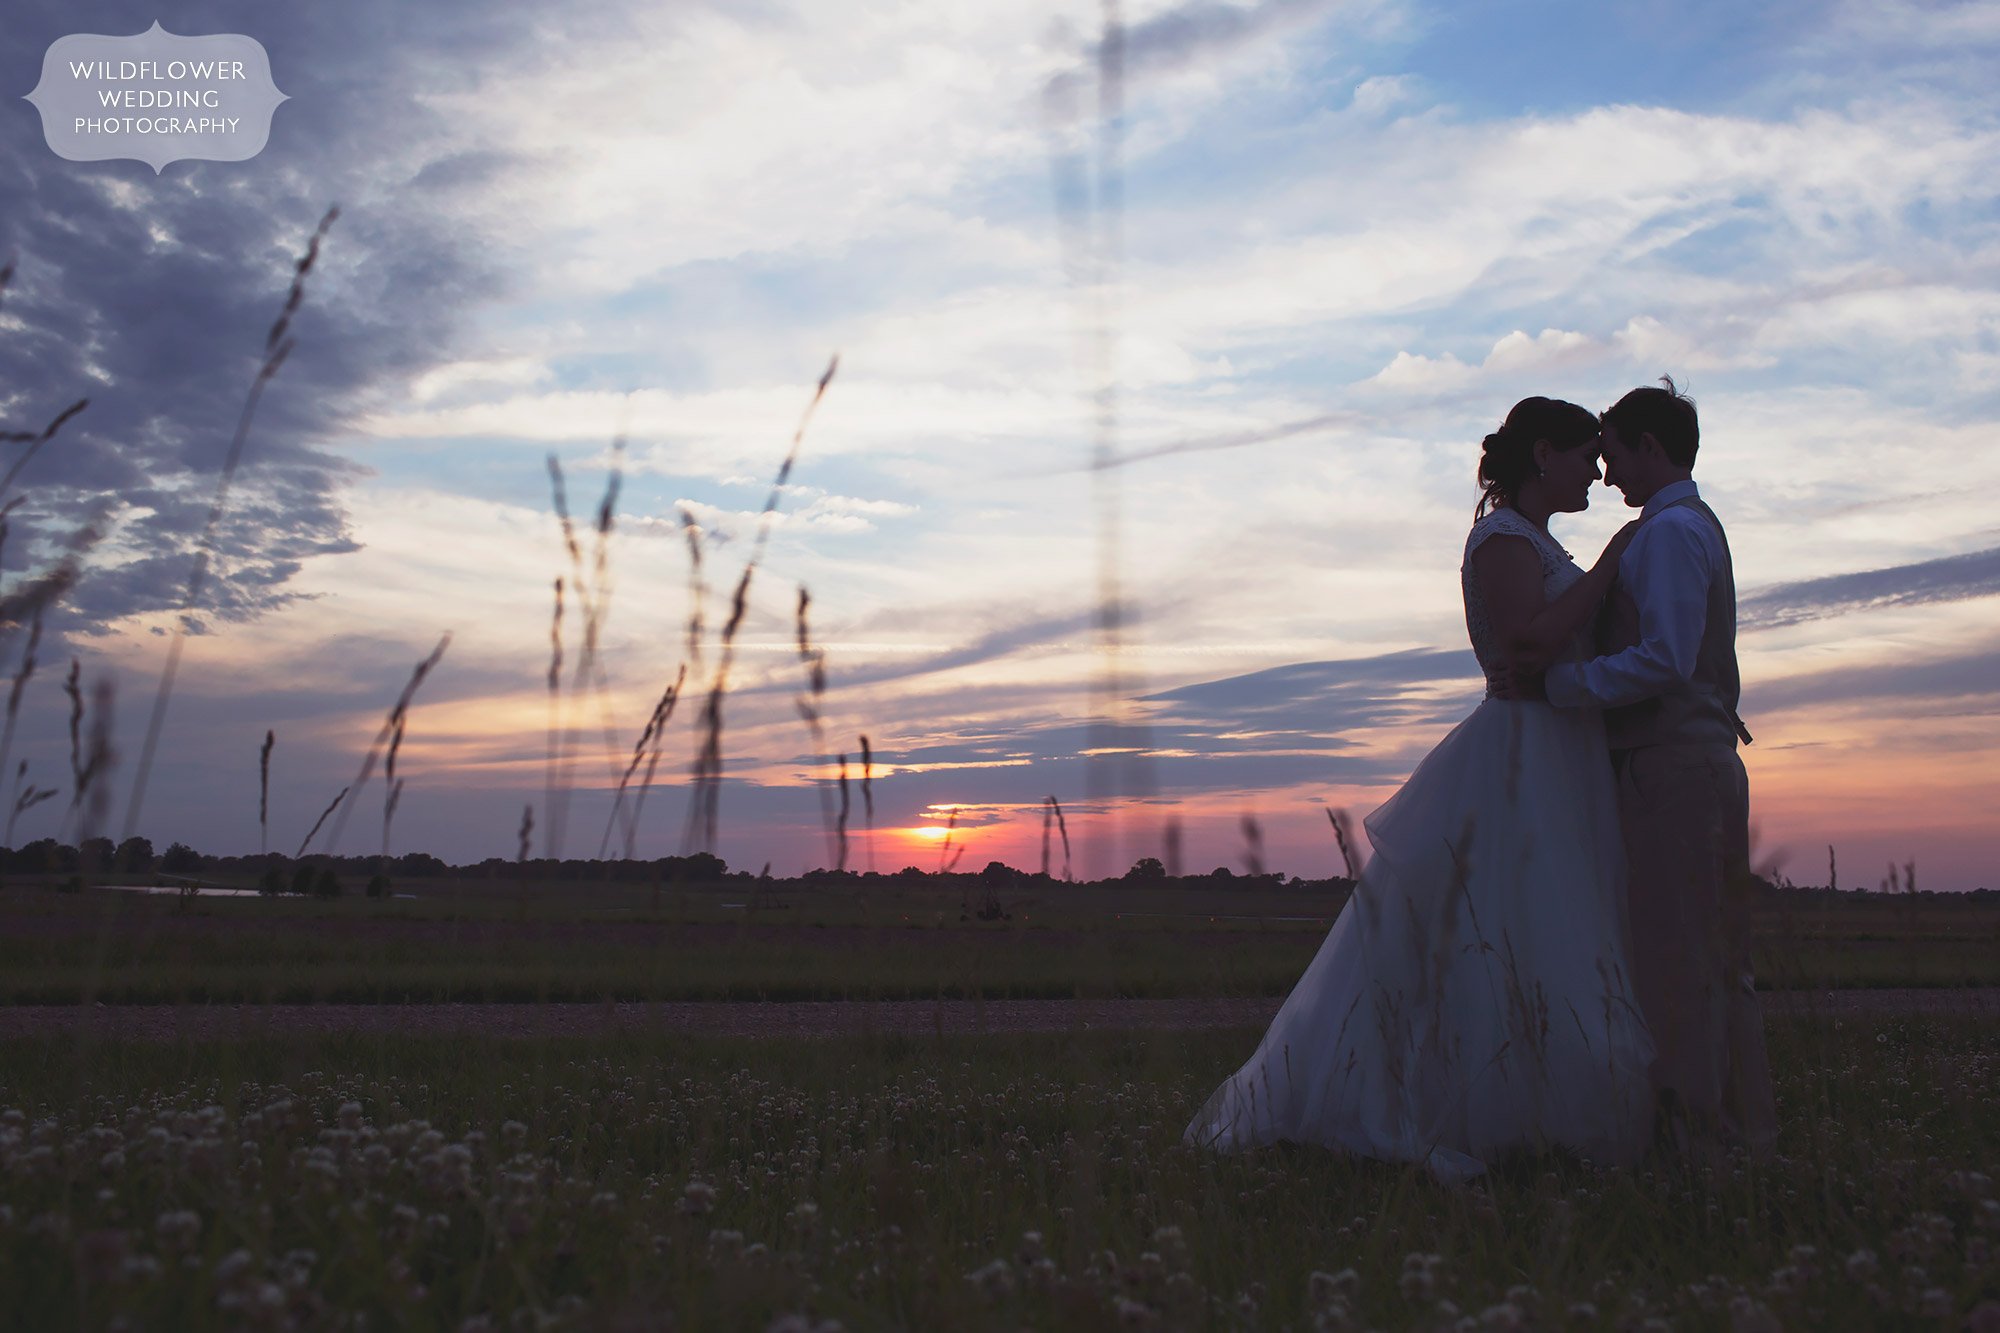 Sunset photo of the bride and groom in the field at Bradford Farm in MO.